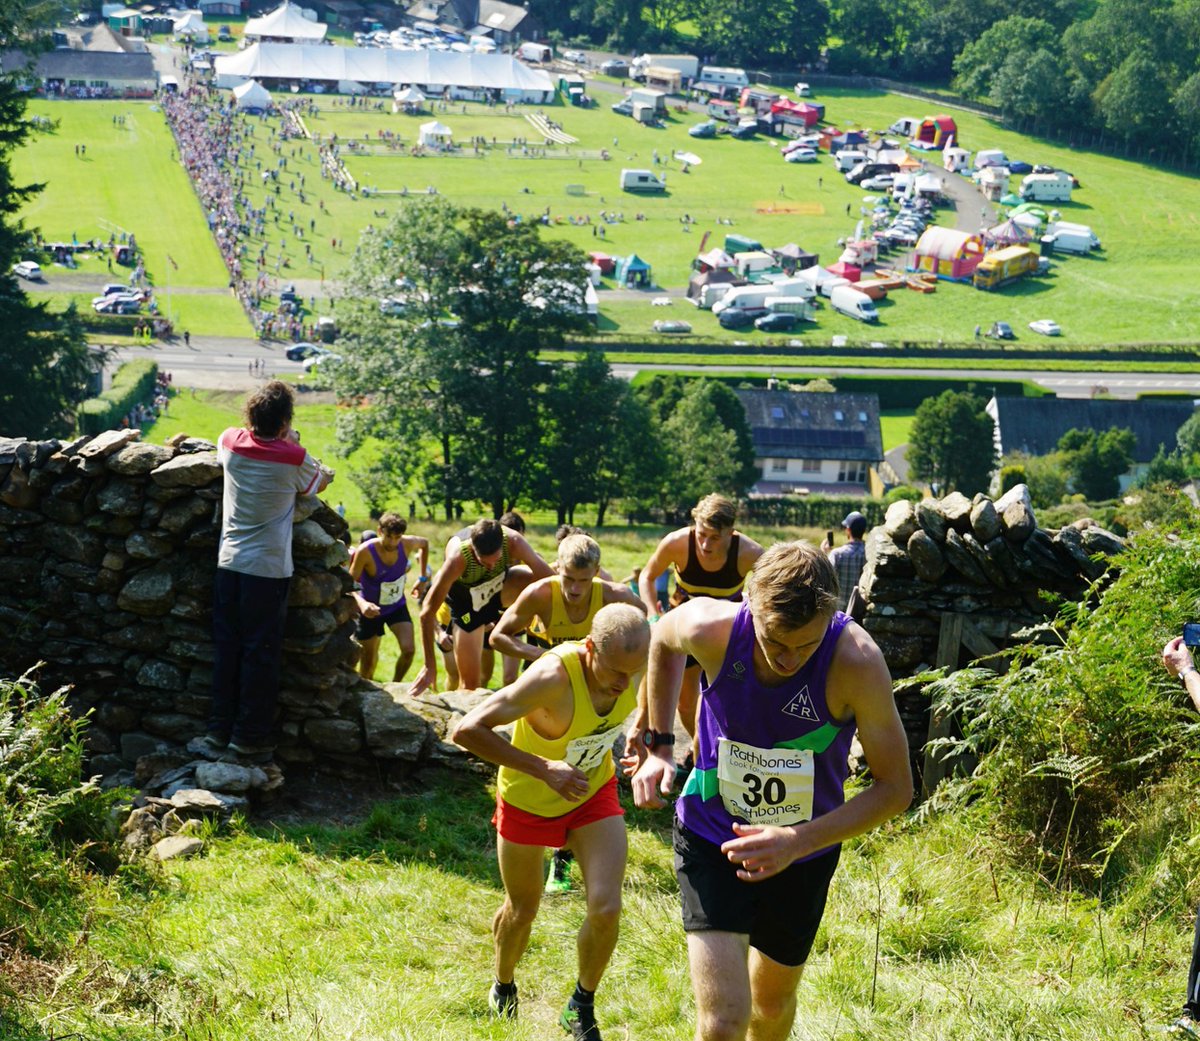 The Grasmere Lakeland Sports & Show returns on August 27th! Get the date in your diary and don't miss out on one of the best traditional family days out!

#GrasmereSports #GrasmereShow #fellrunning #CumberlandAndWestmorlandWrestling  #AugustBankHoliday #Cumbria #LakeDistrict